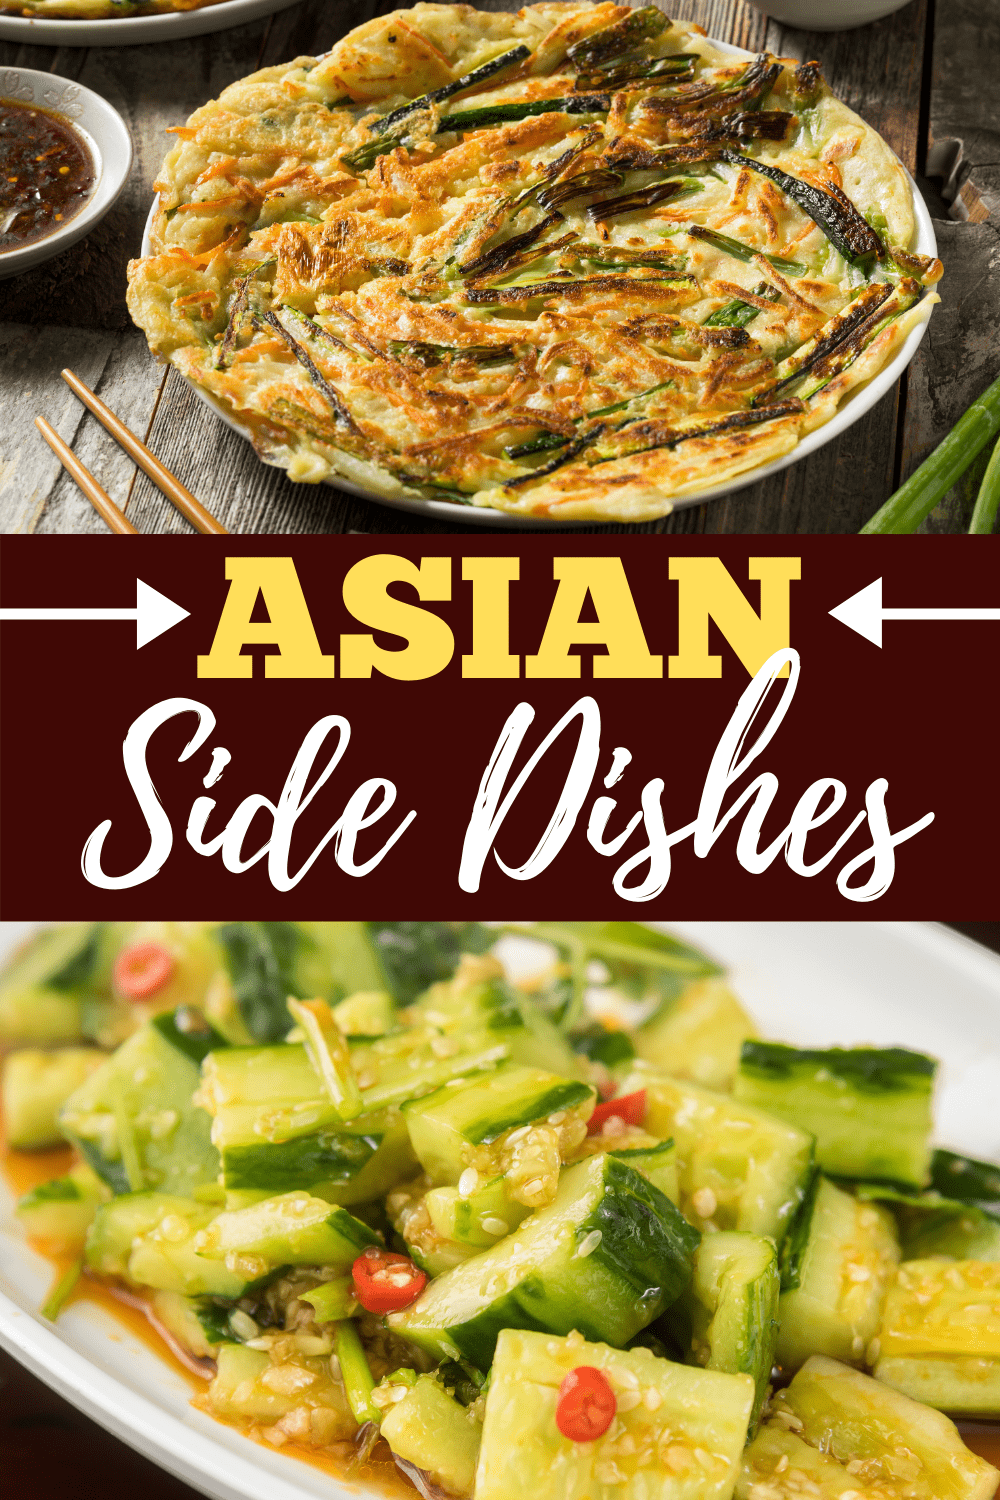 14 Easy Asian Side Dishes - Insanely Good